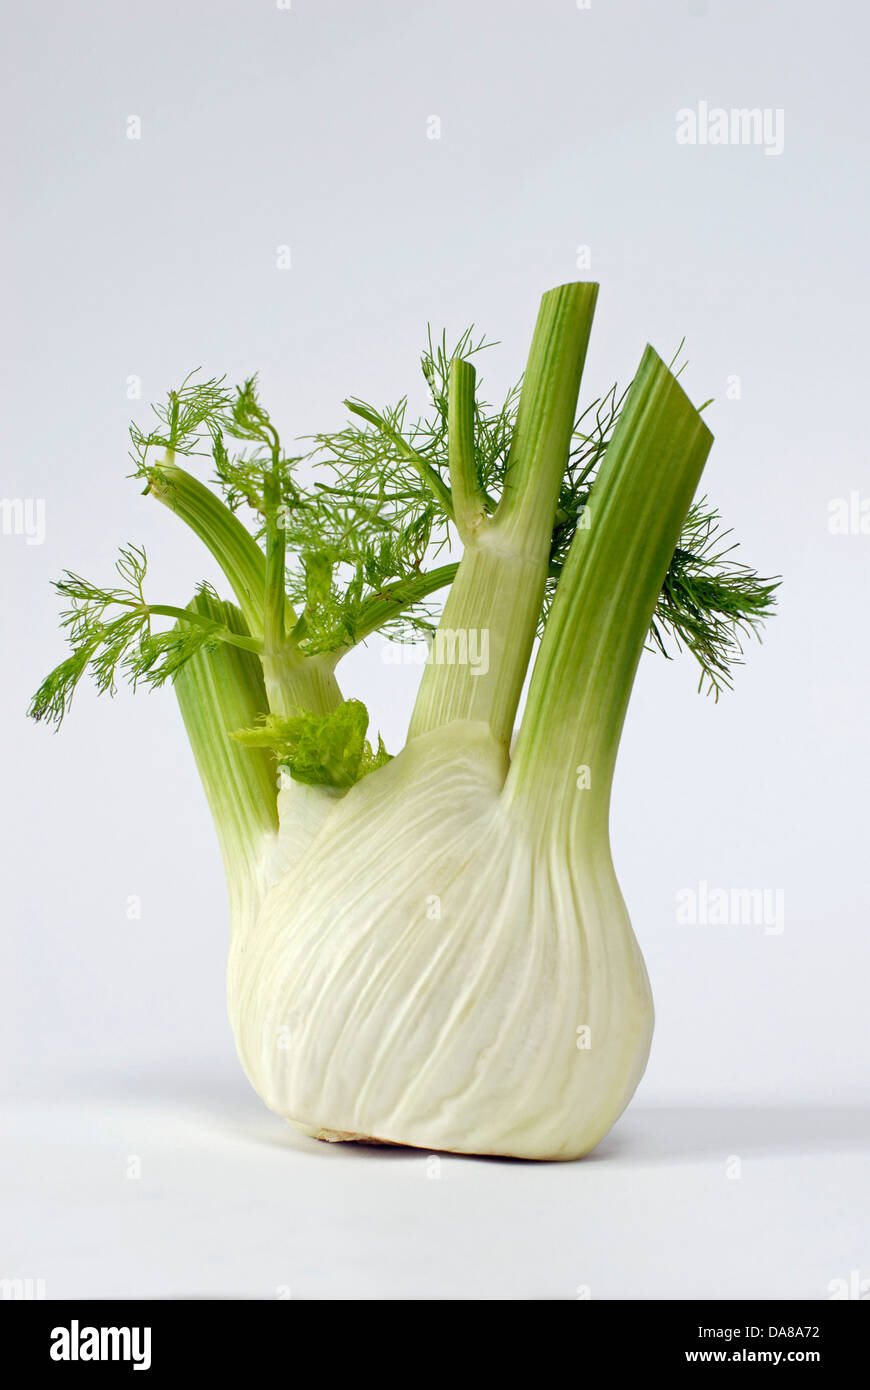 A bulb of fennel Stock Photo